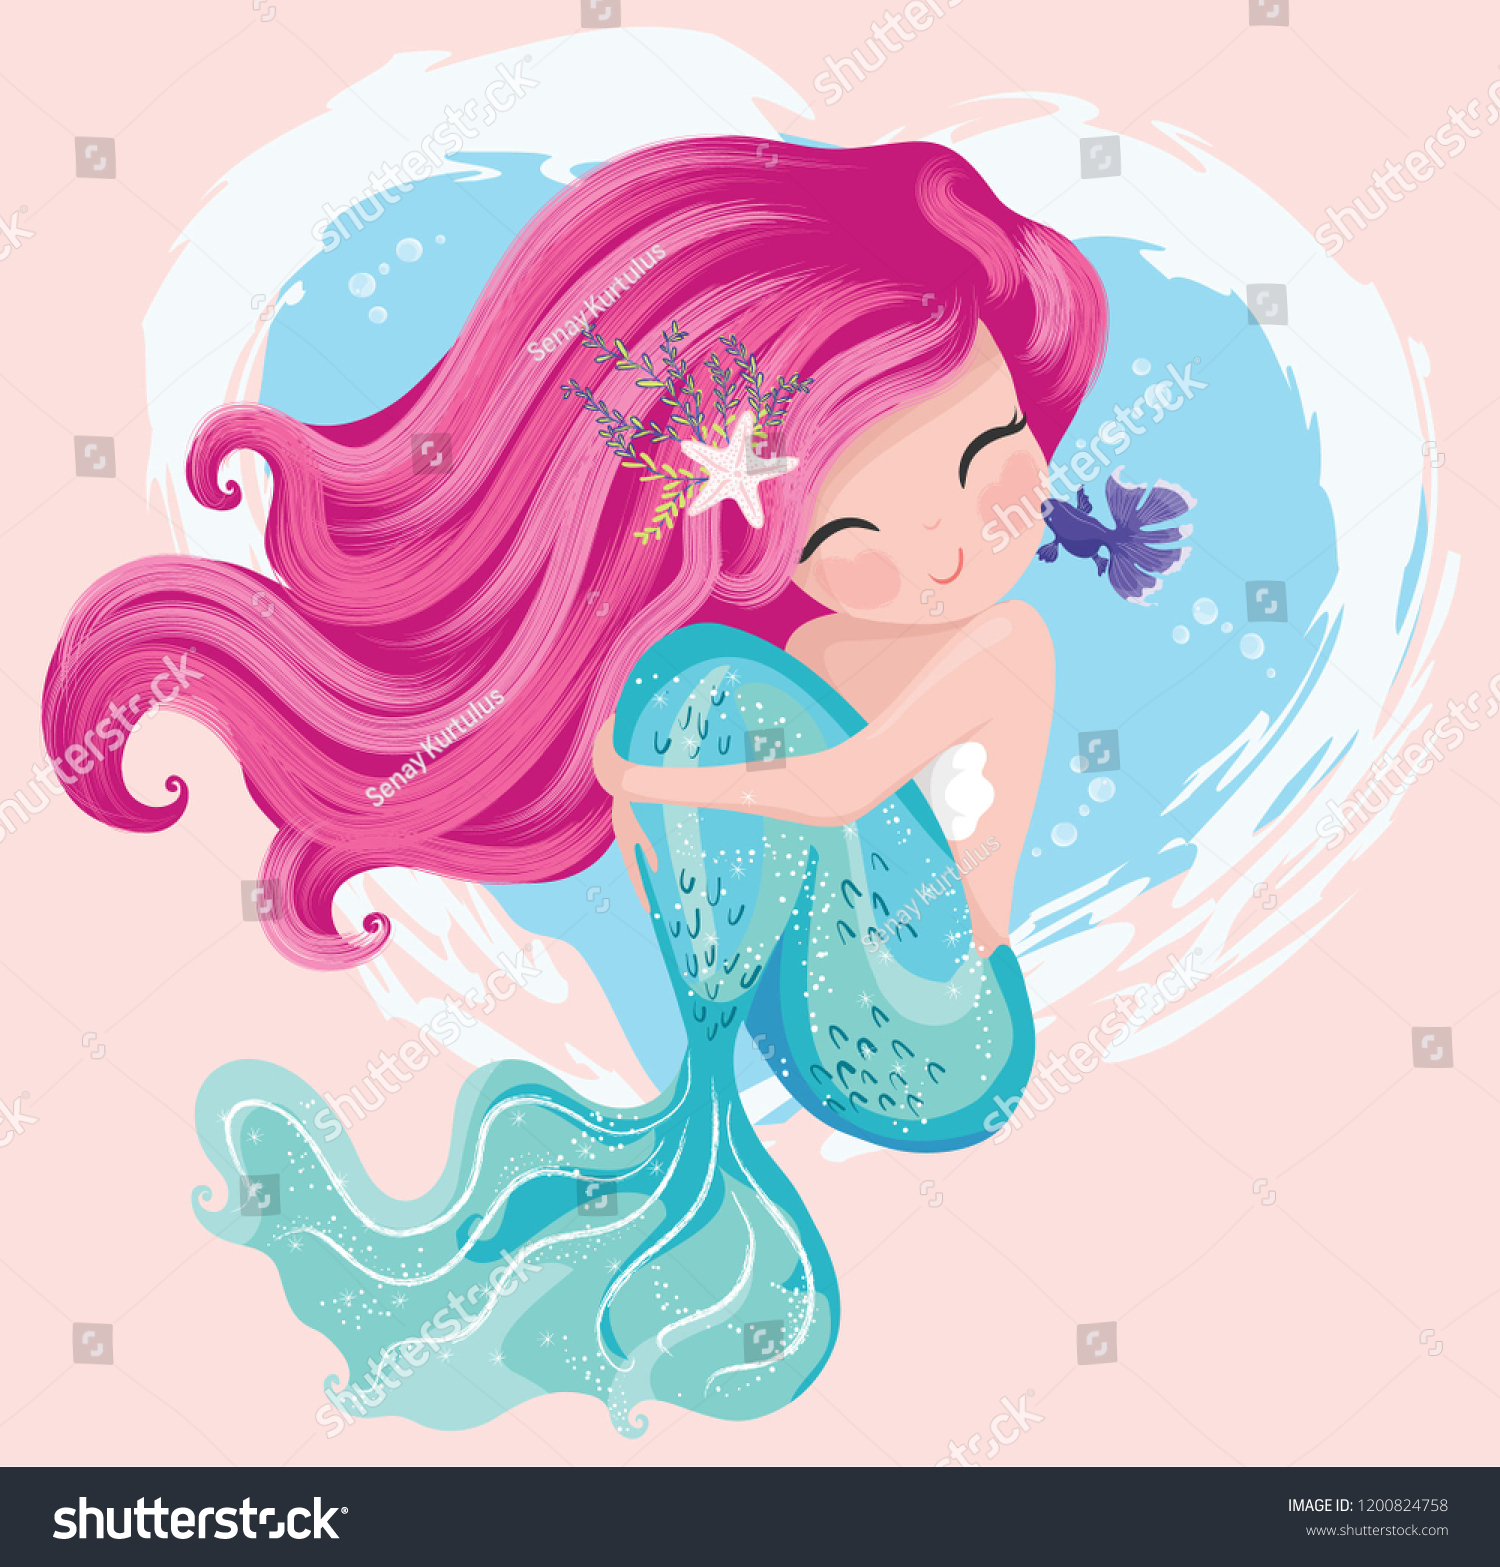 Cute mermaid with little fish vector illustration for kids fashion artworks, children books, greeting cards. #1200824758